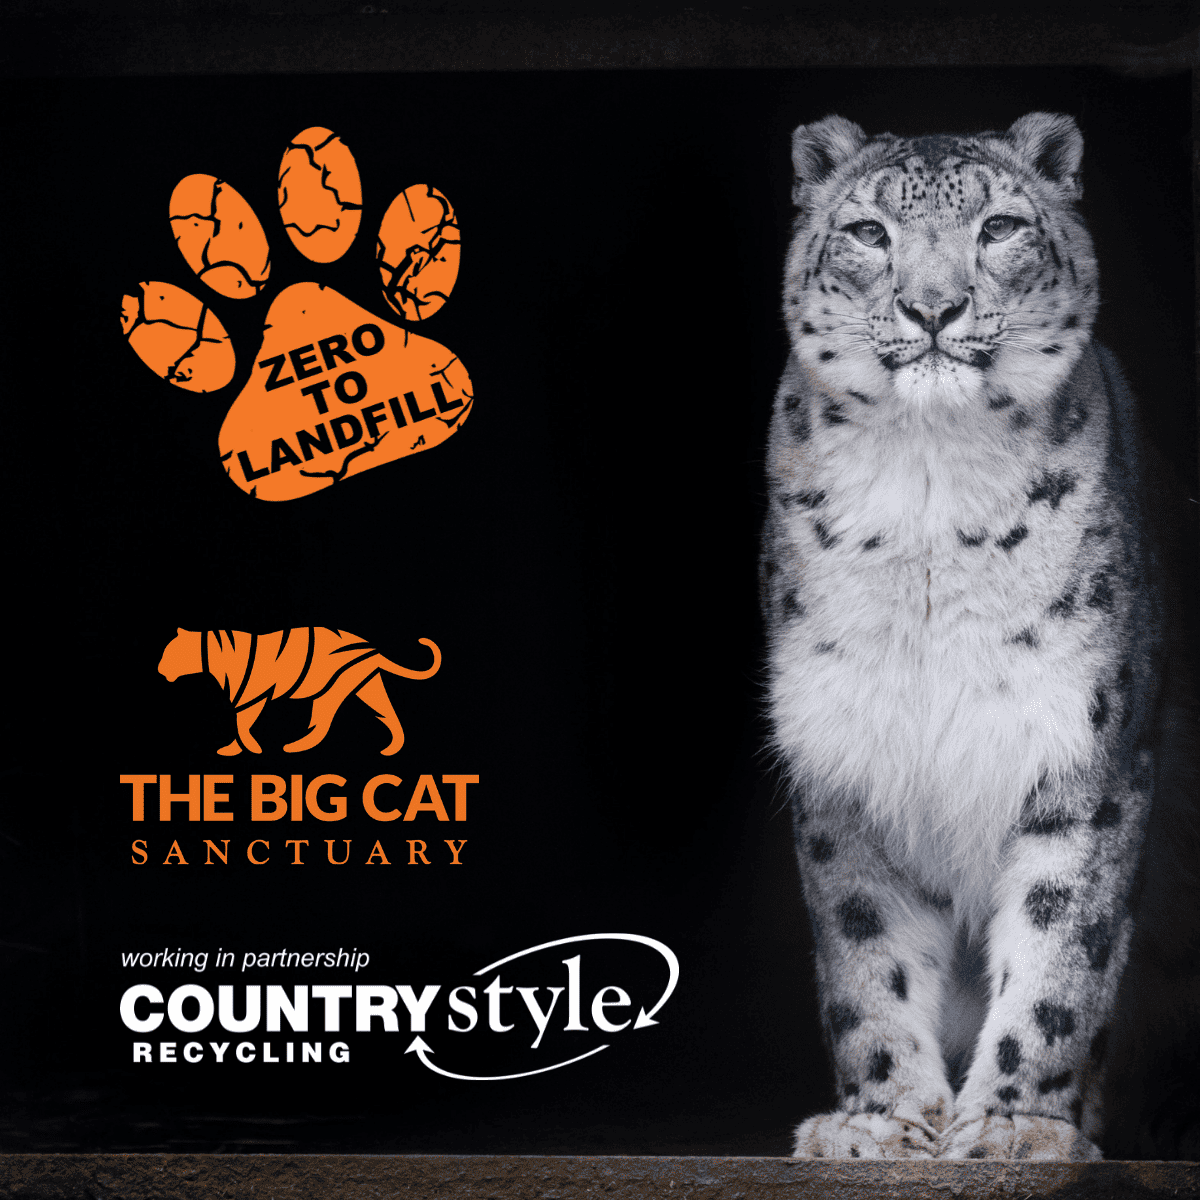 Going wild at Countrystyle following a new partnership with The Big Cat Sanctuary